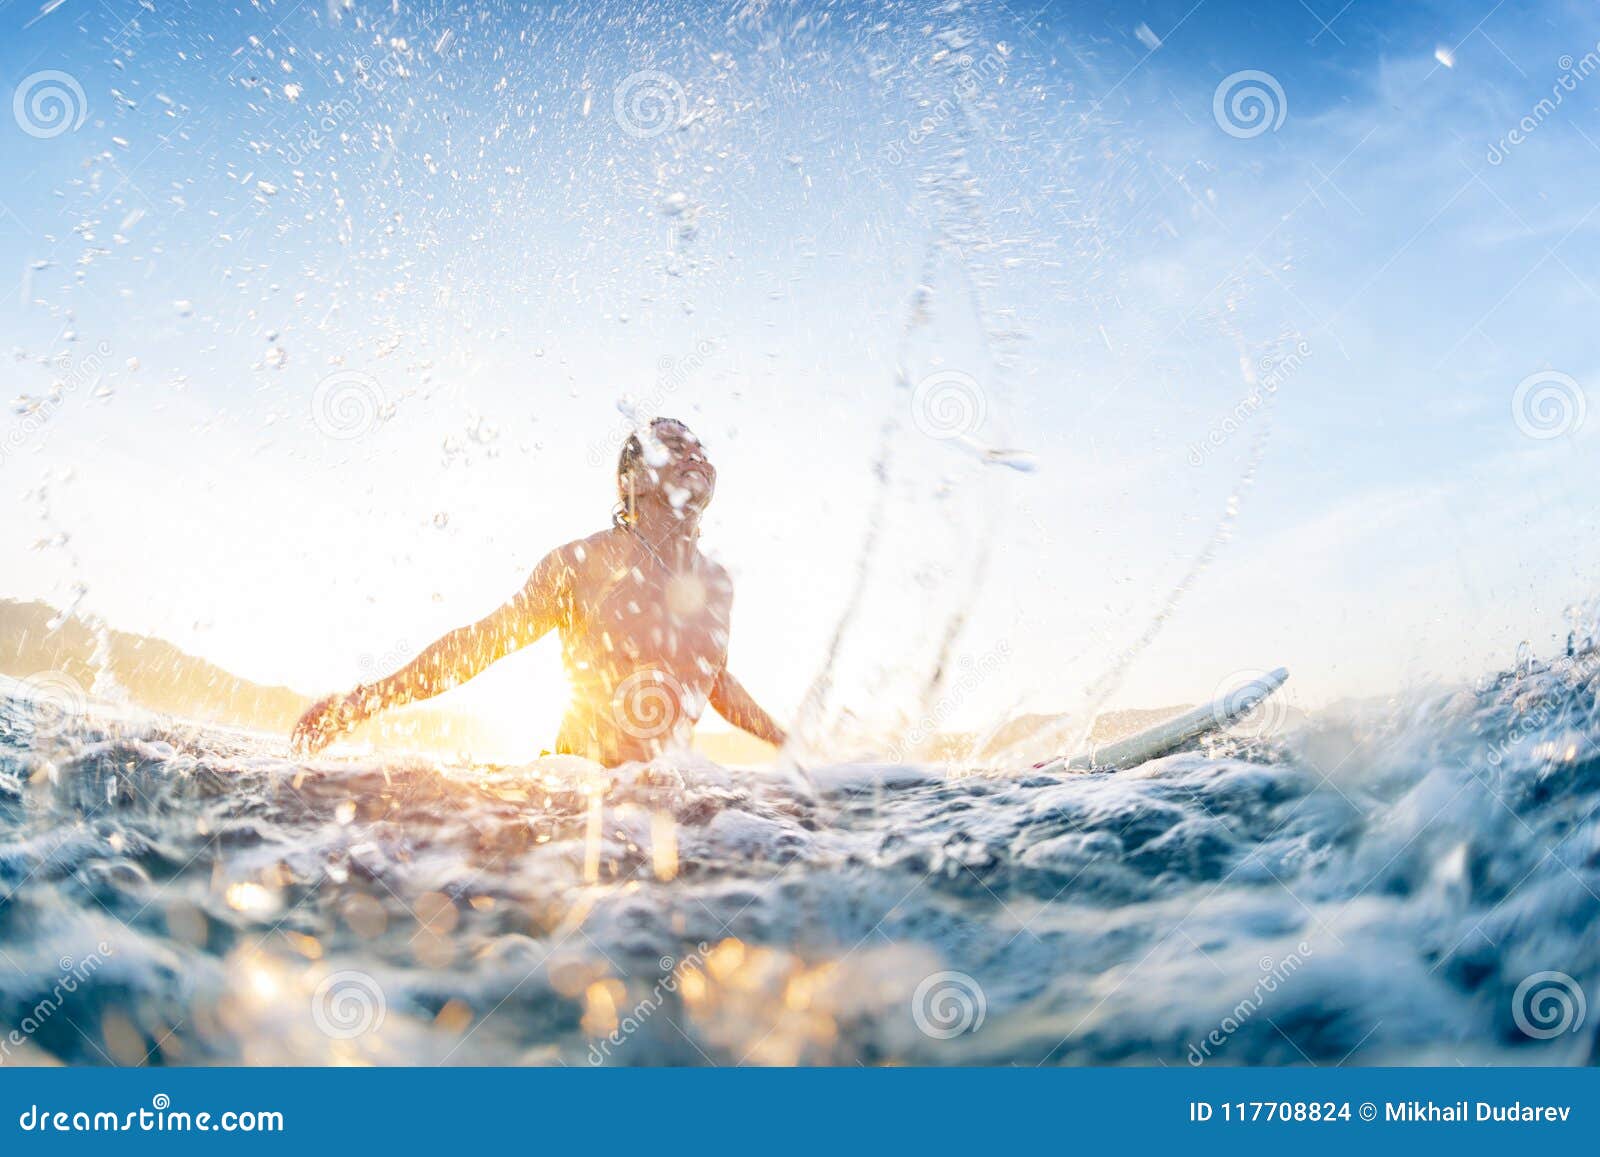 Surfer Haves Fun And Makes Water Splashes Stock Photo